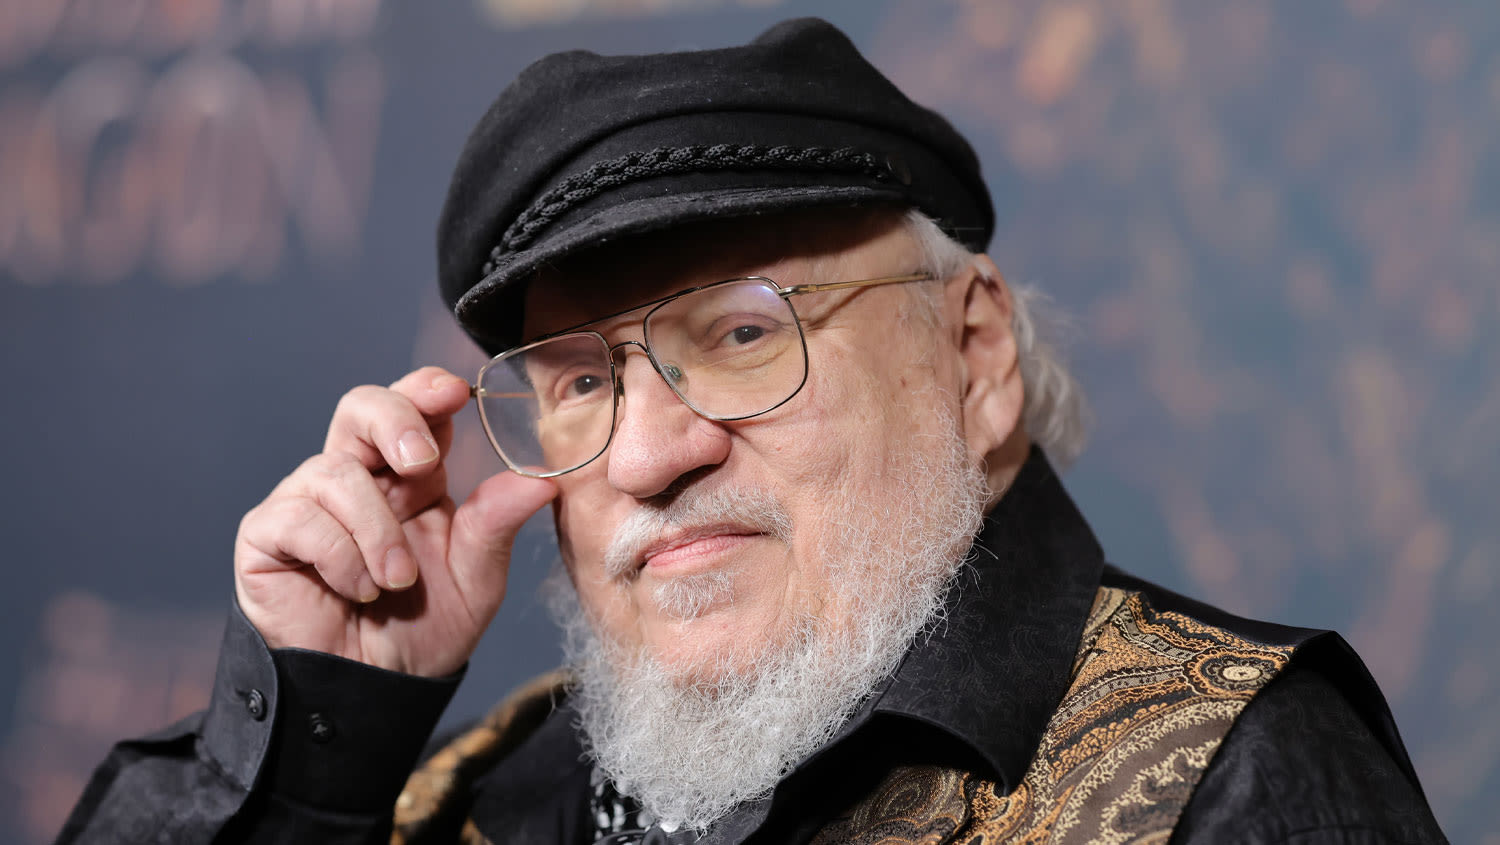 George R.R. Martin Raves About ‘House Of The Dragon’ So Far: “Magnificent”